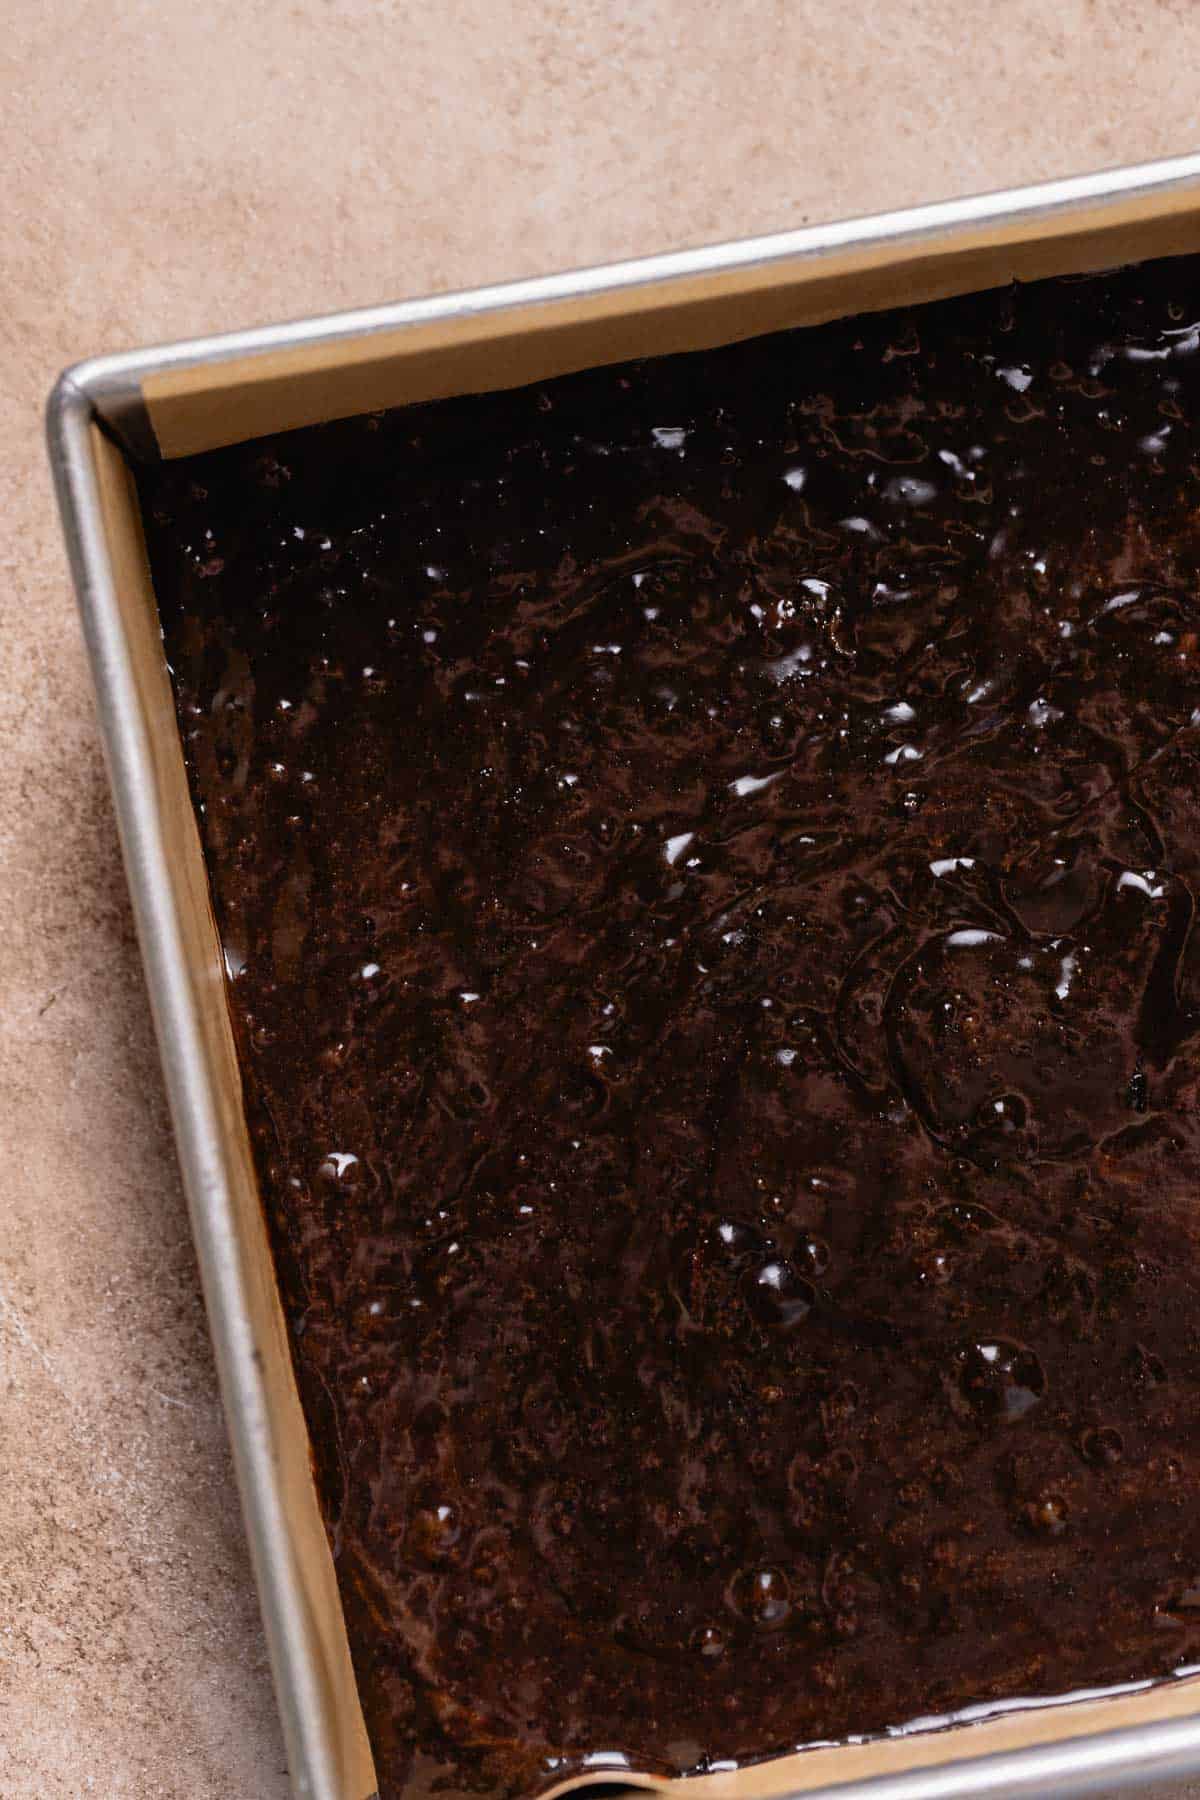 A baking pan full of the brownie batter before baking.